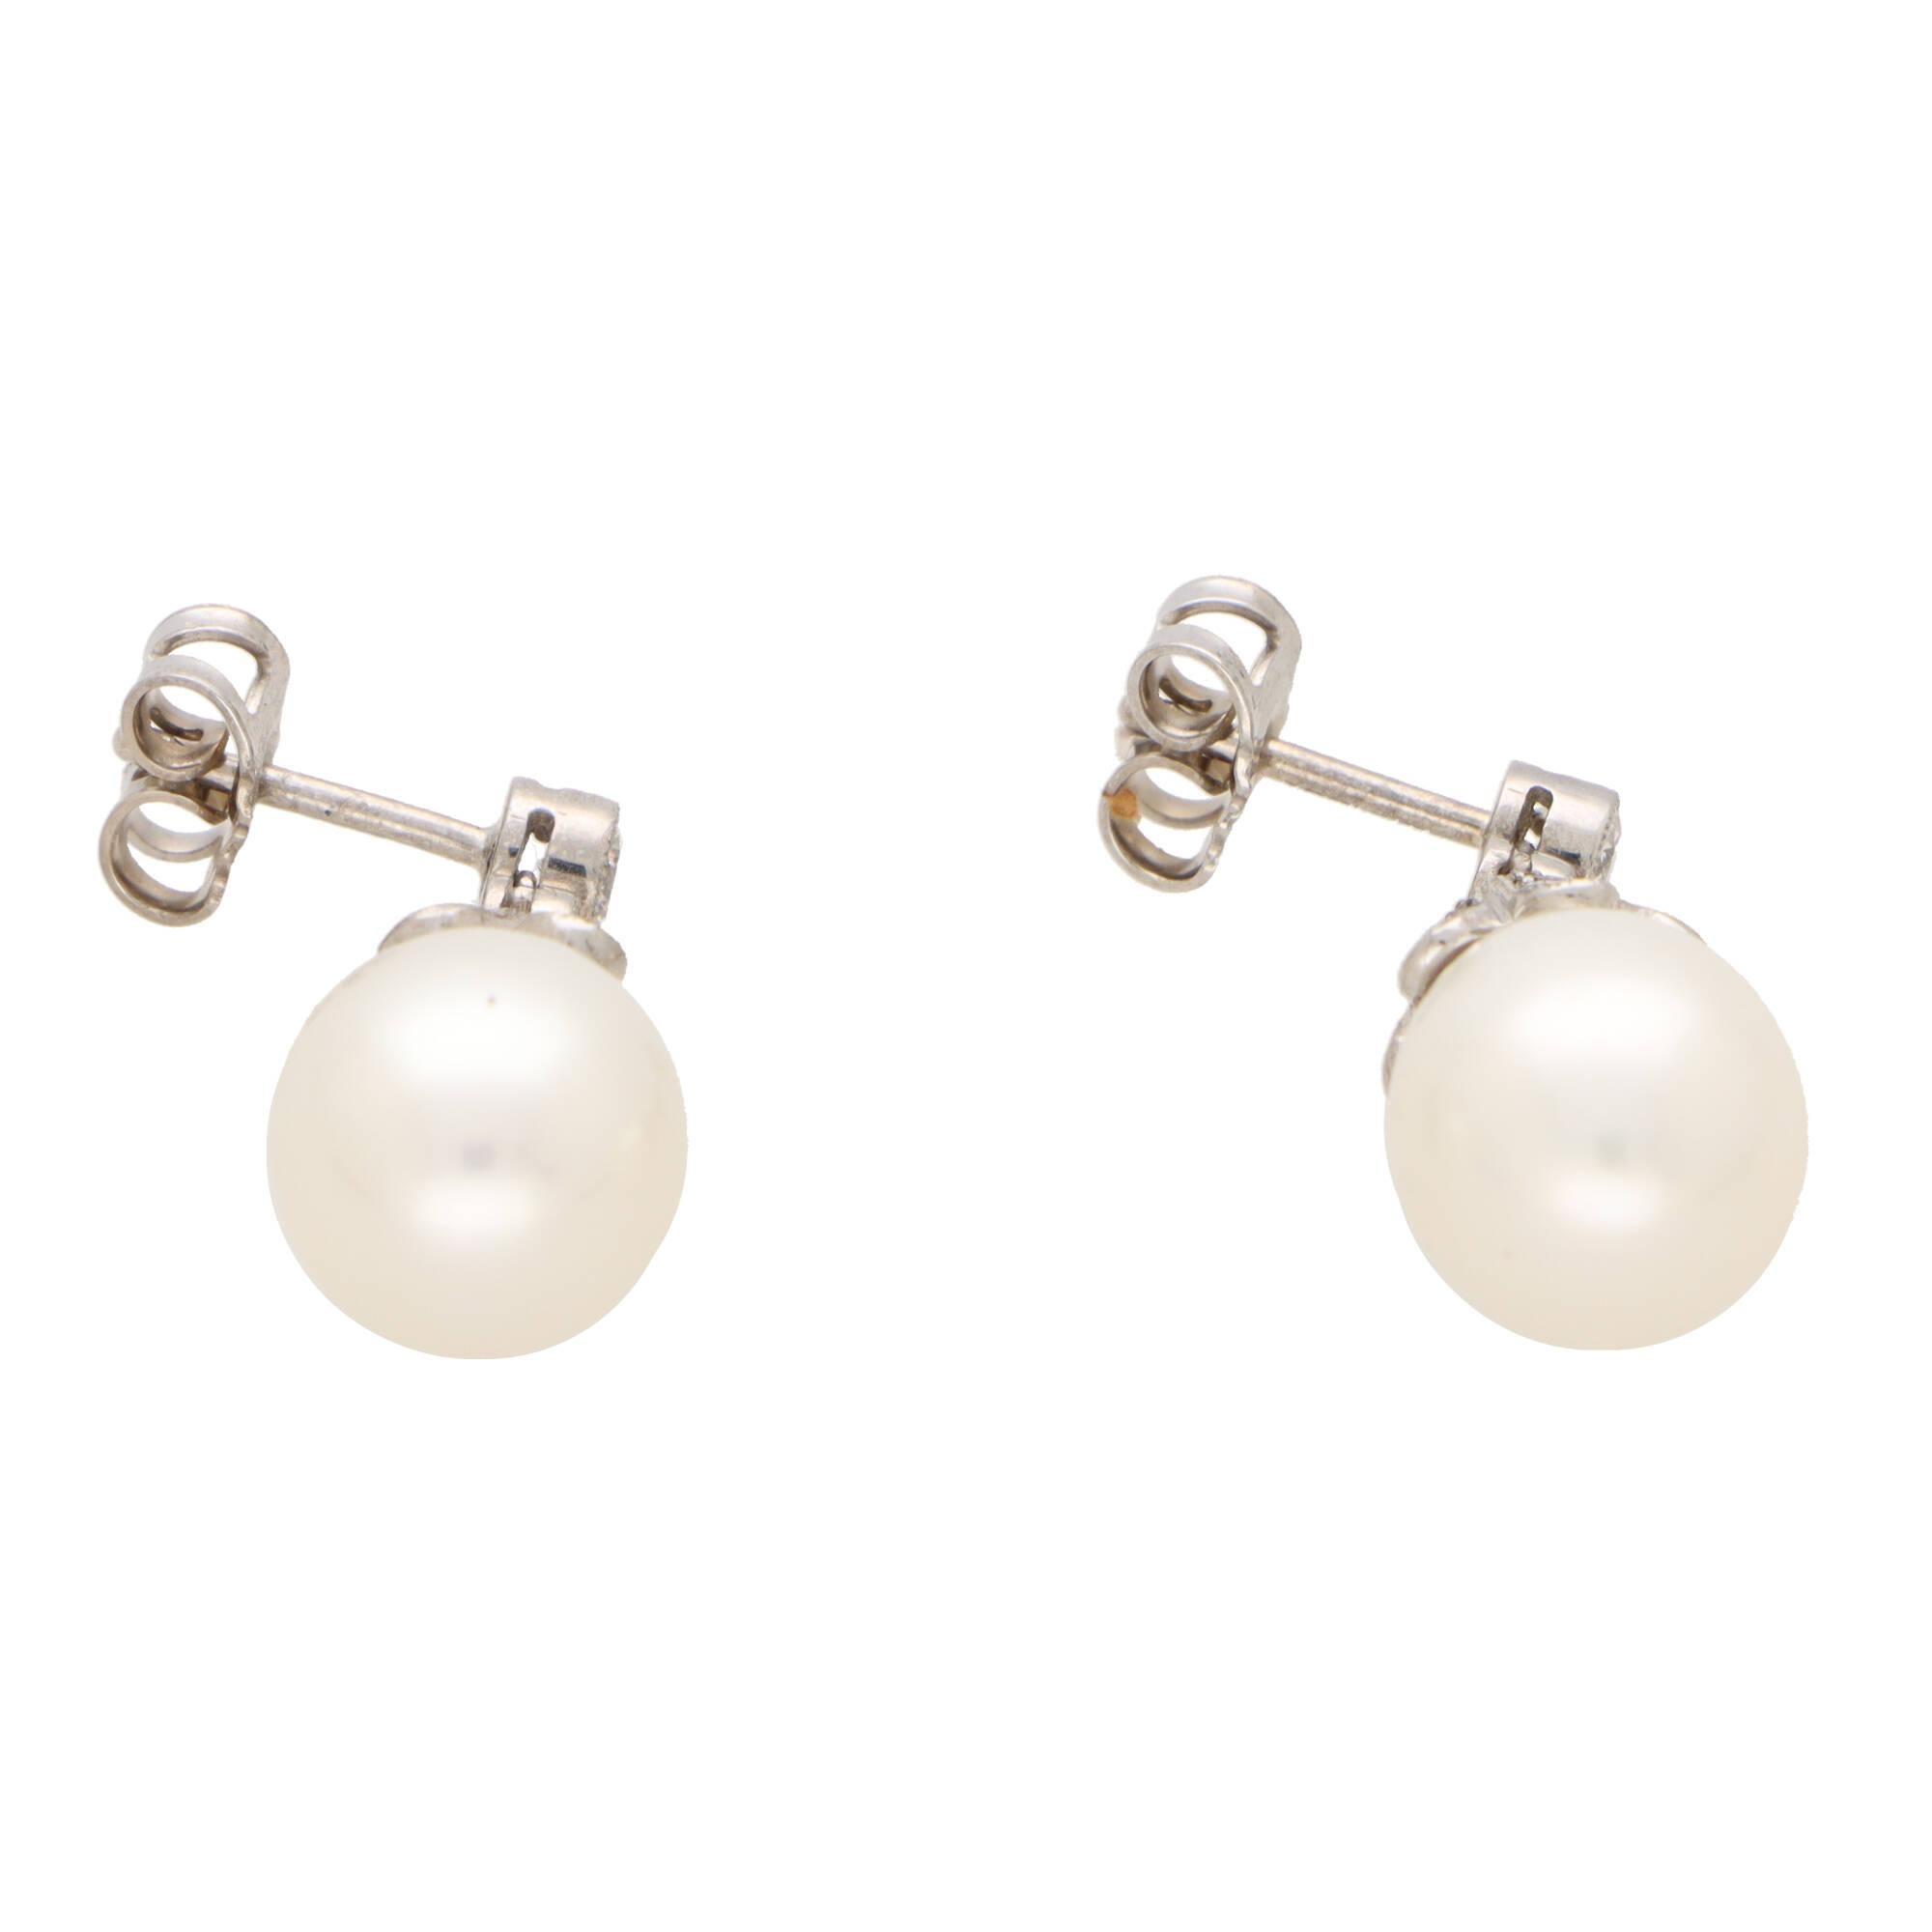 A beautiful pair of white cultured pearl and diamond drop earrings set in 18k white gold.

Each earring is firstly composed of a rub over round brilliant cut diamond stud, secured to reverse with a post and butterfly fitting. Hanging freely from the